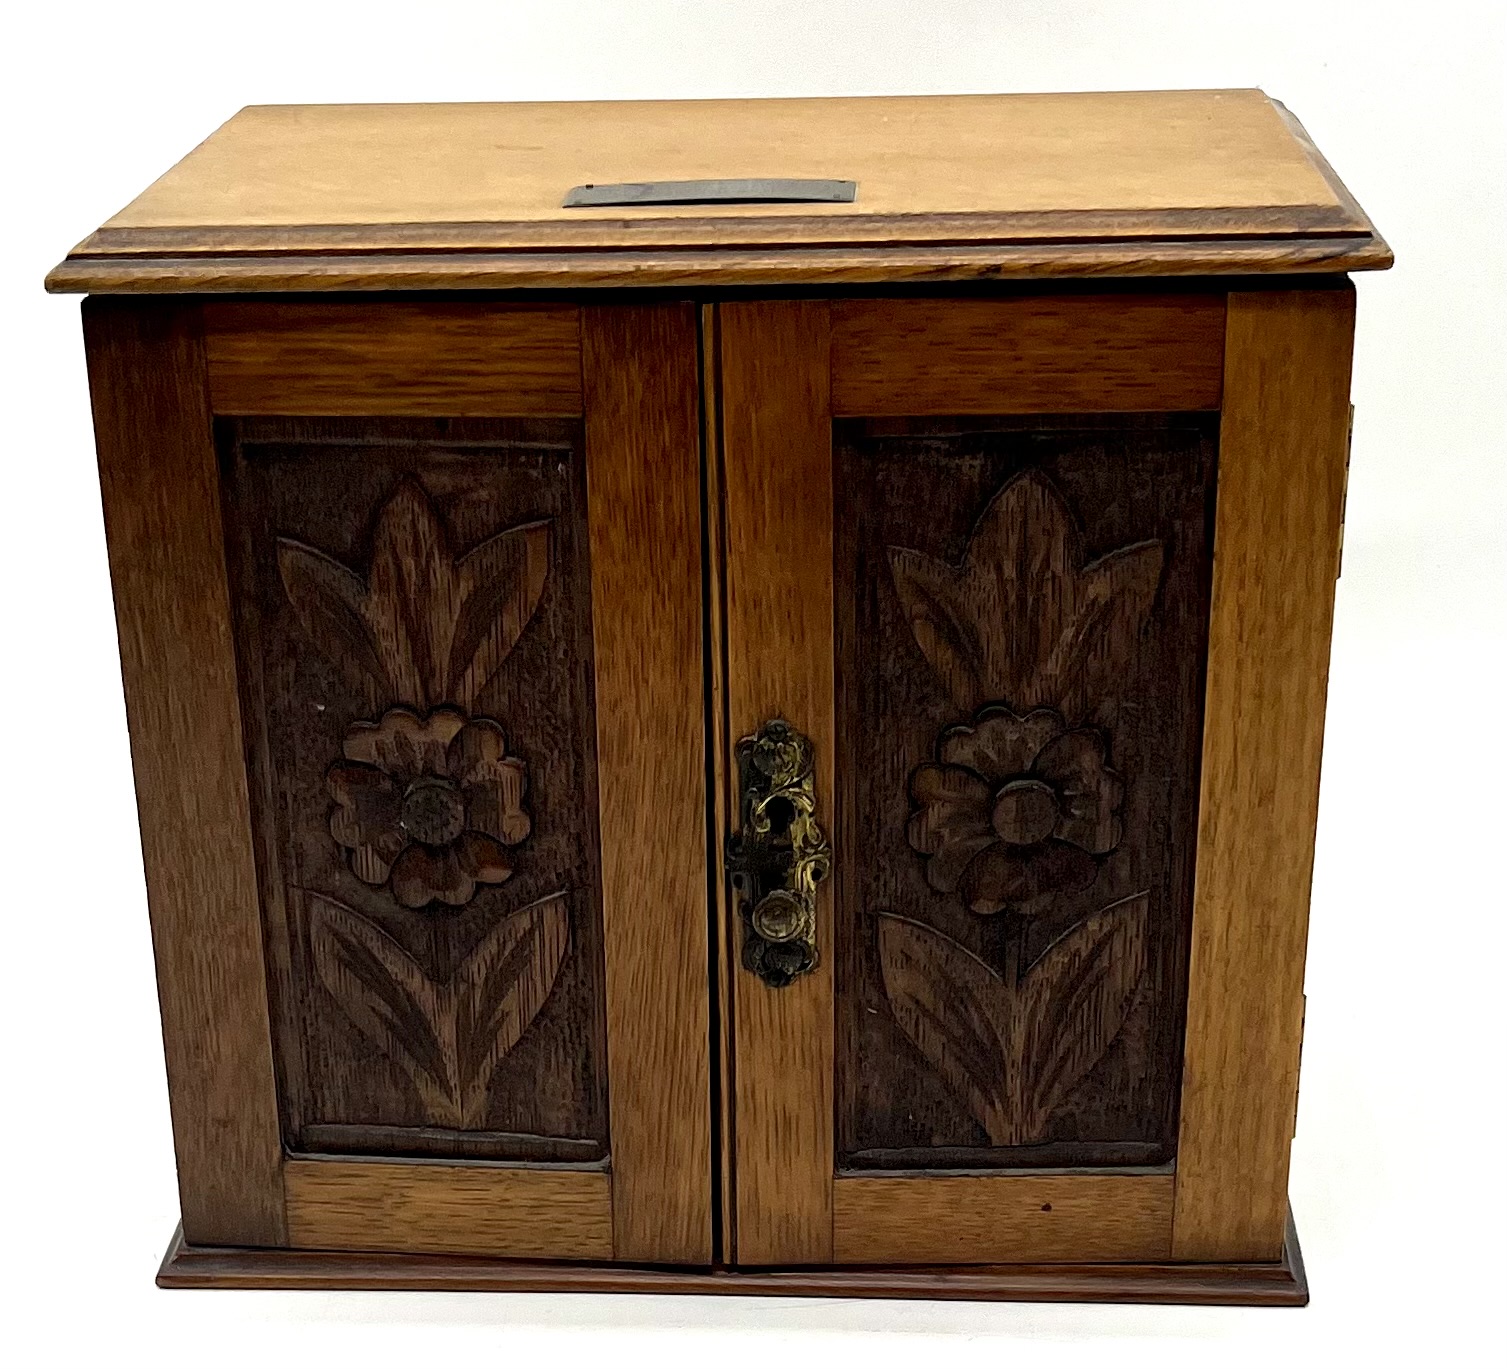 An Edwardian smokers cabinet, dated 1909